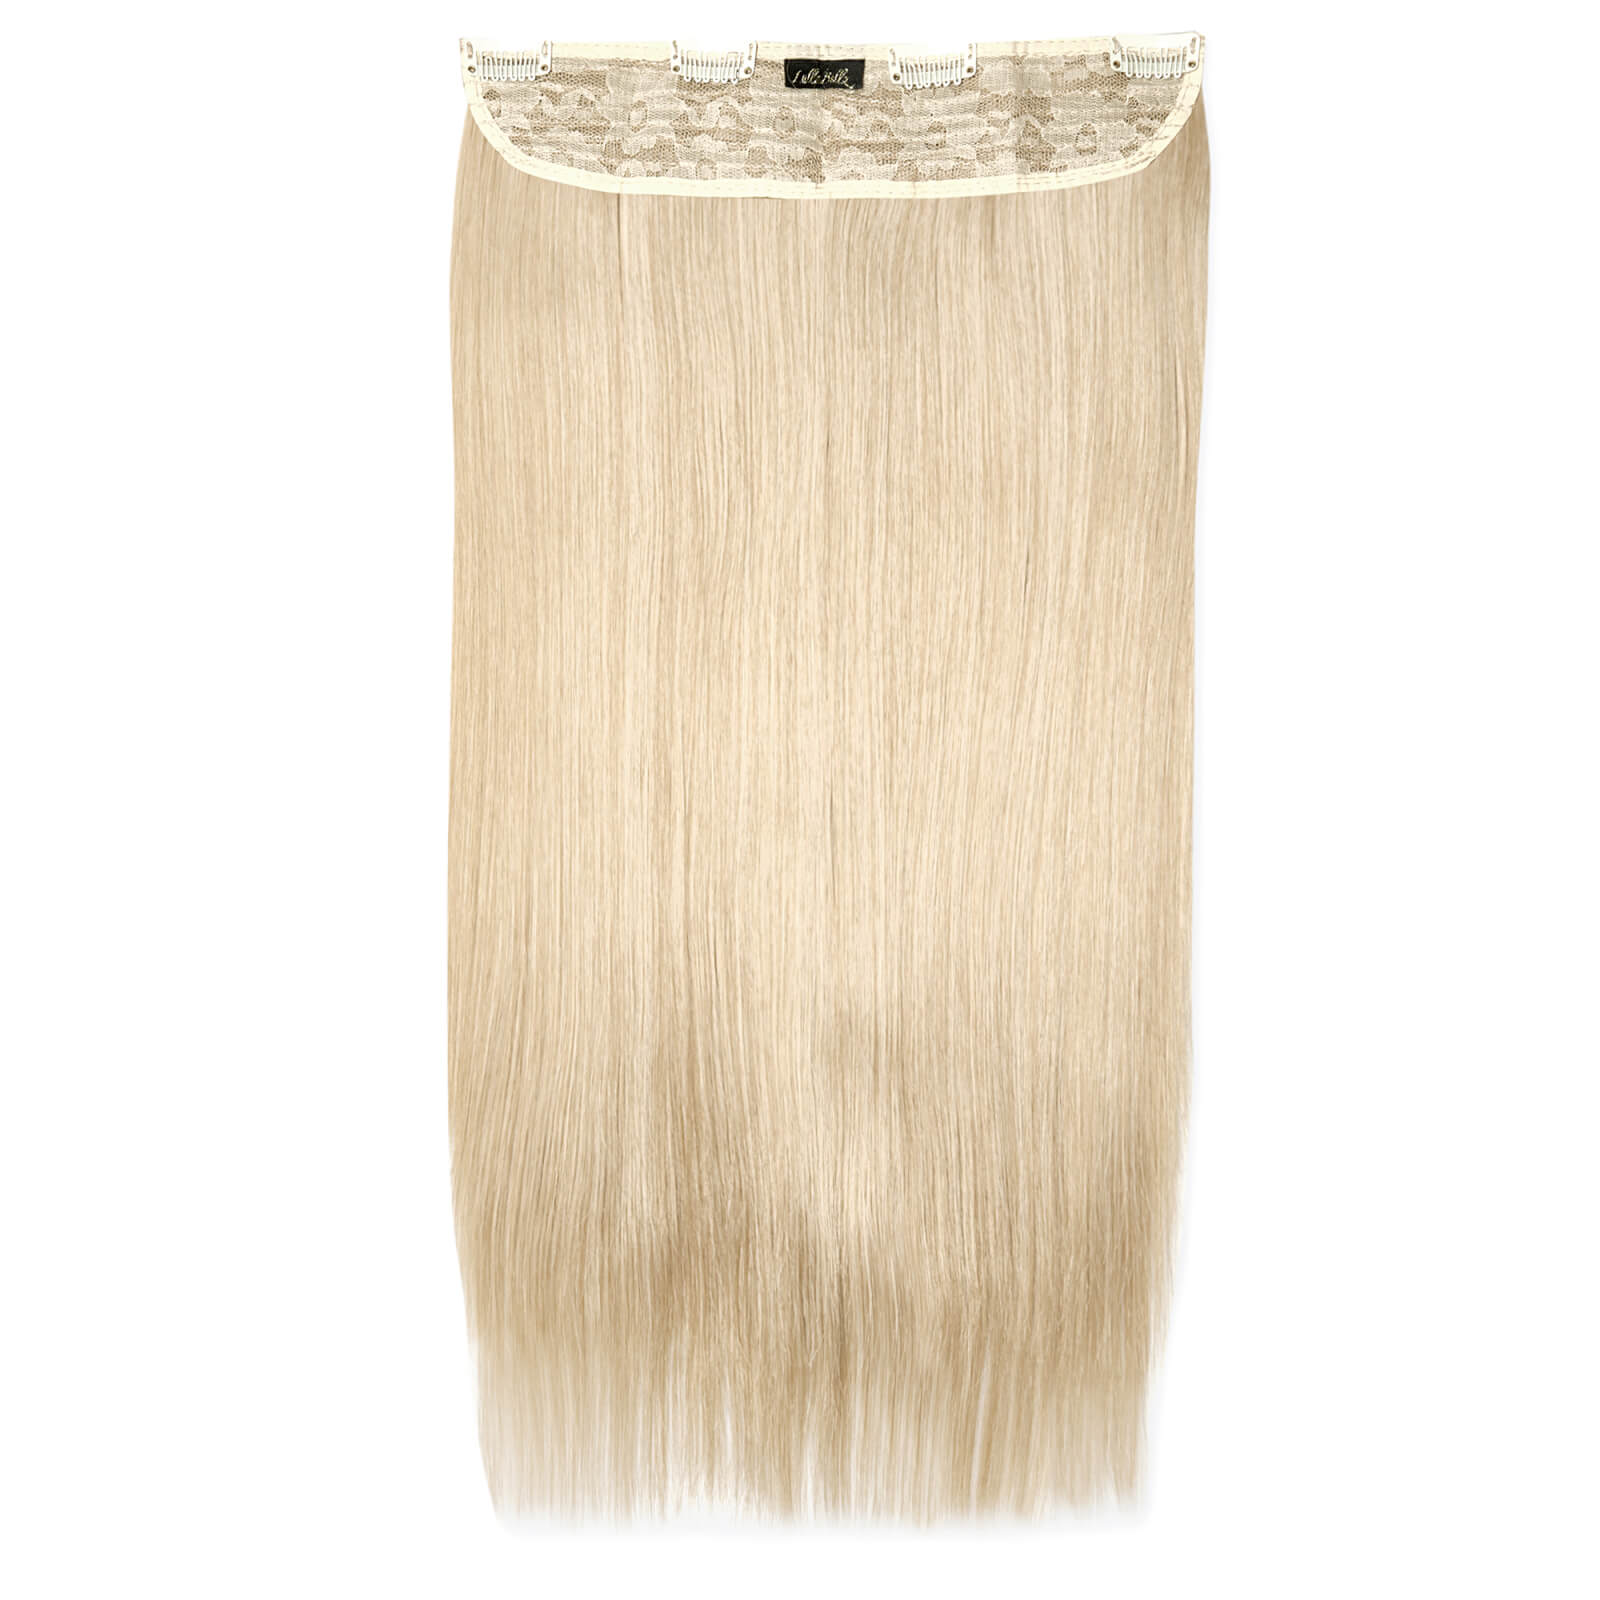 LullaBellz Thick 24 1-Piece Straight Clip in Hair Extensions (Various Colours) - Light Blonde